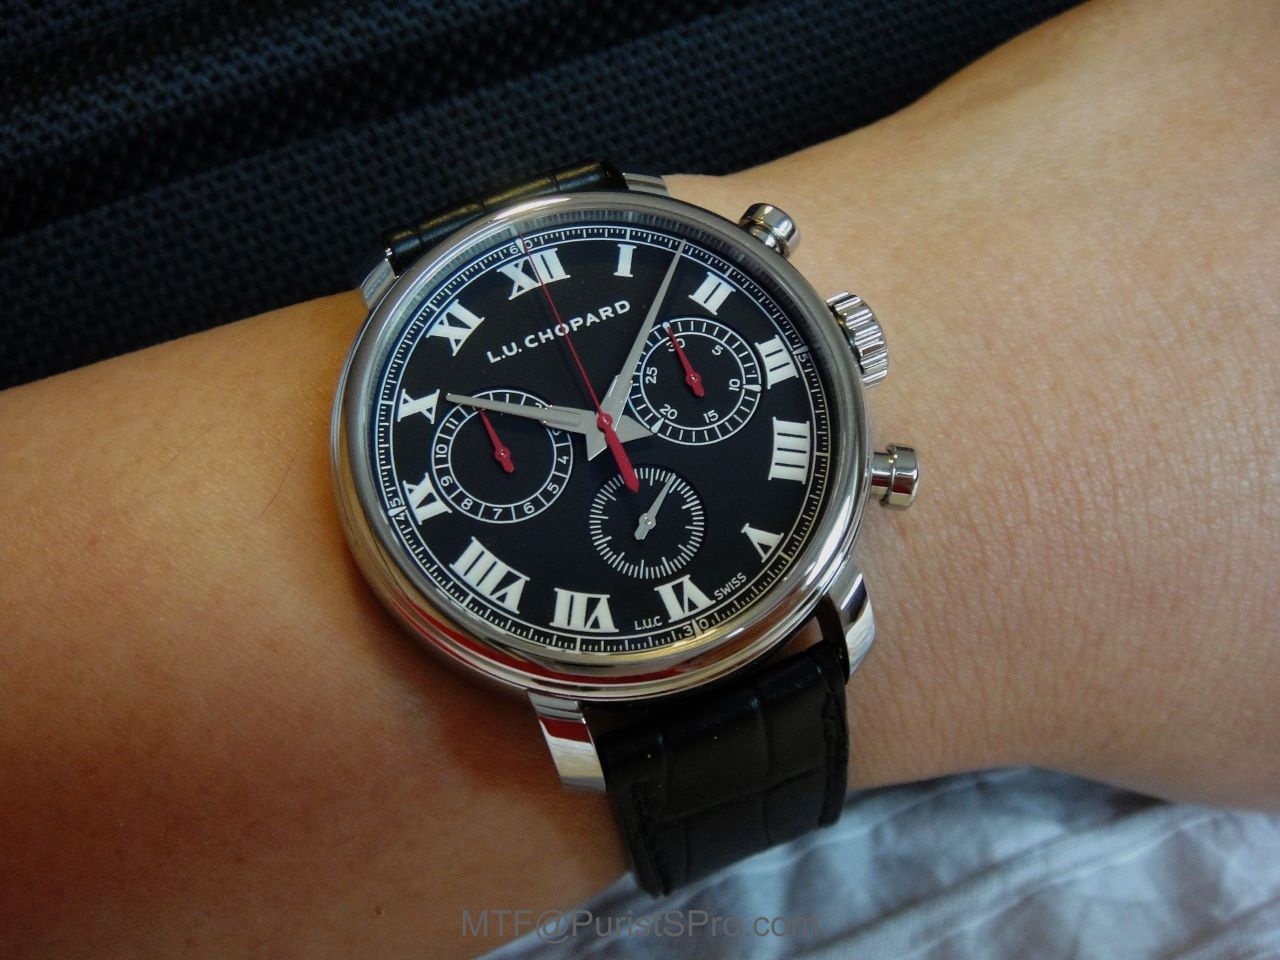 Chopard LUC 1963 Chronograph PuristS Edition watch: Owner Review